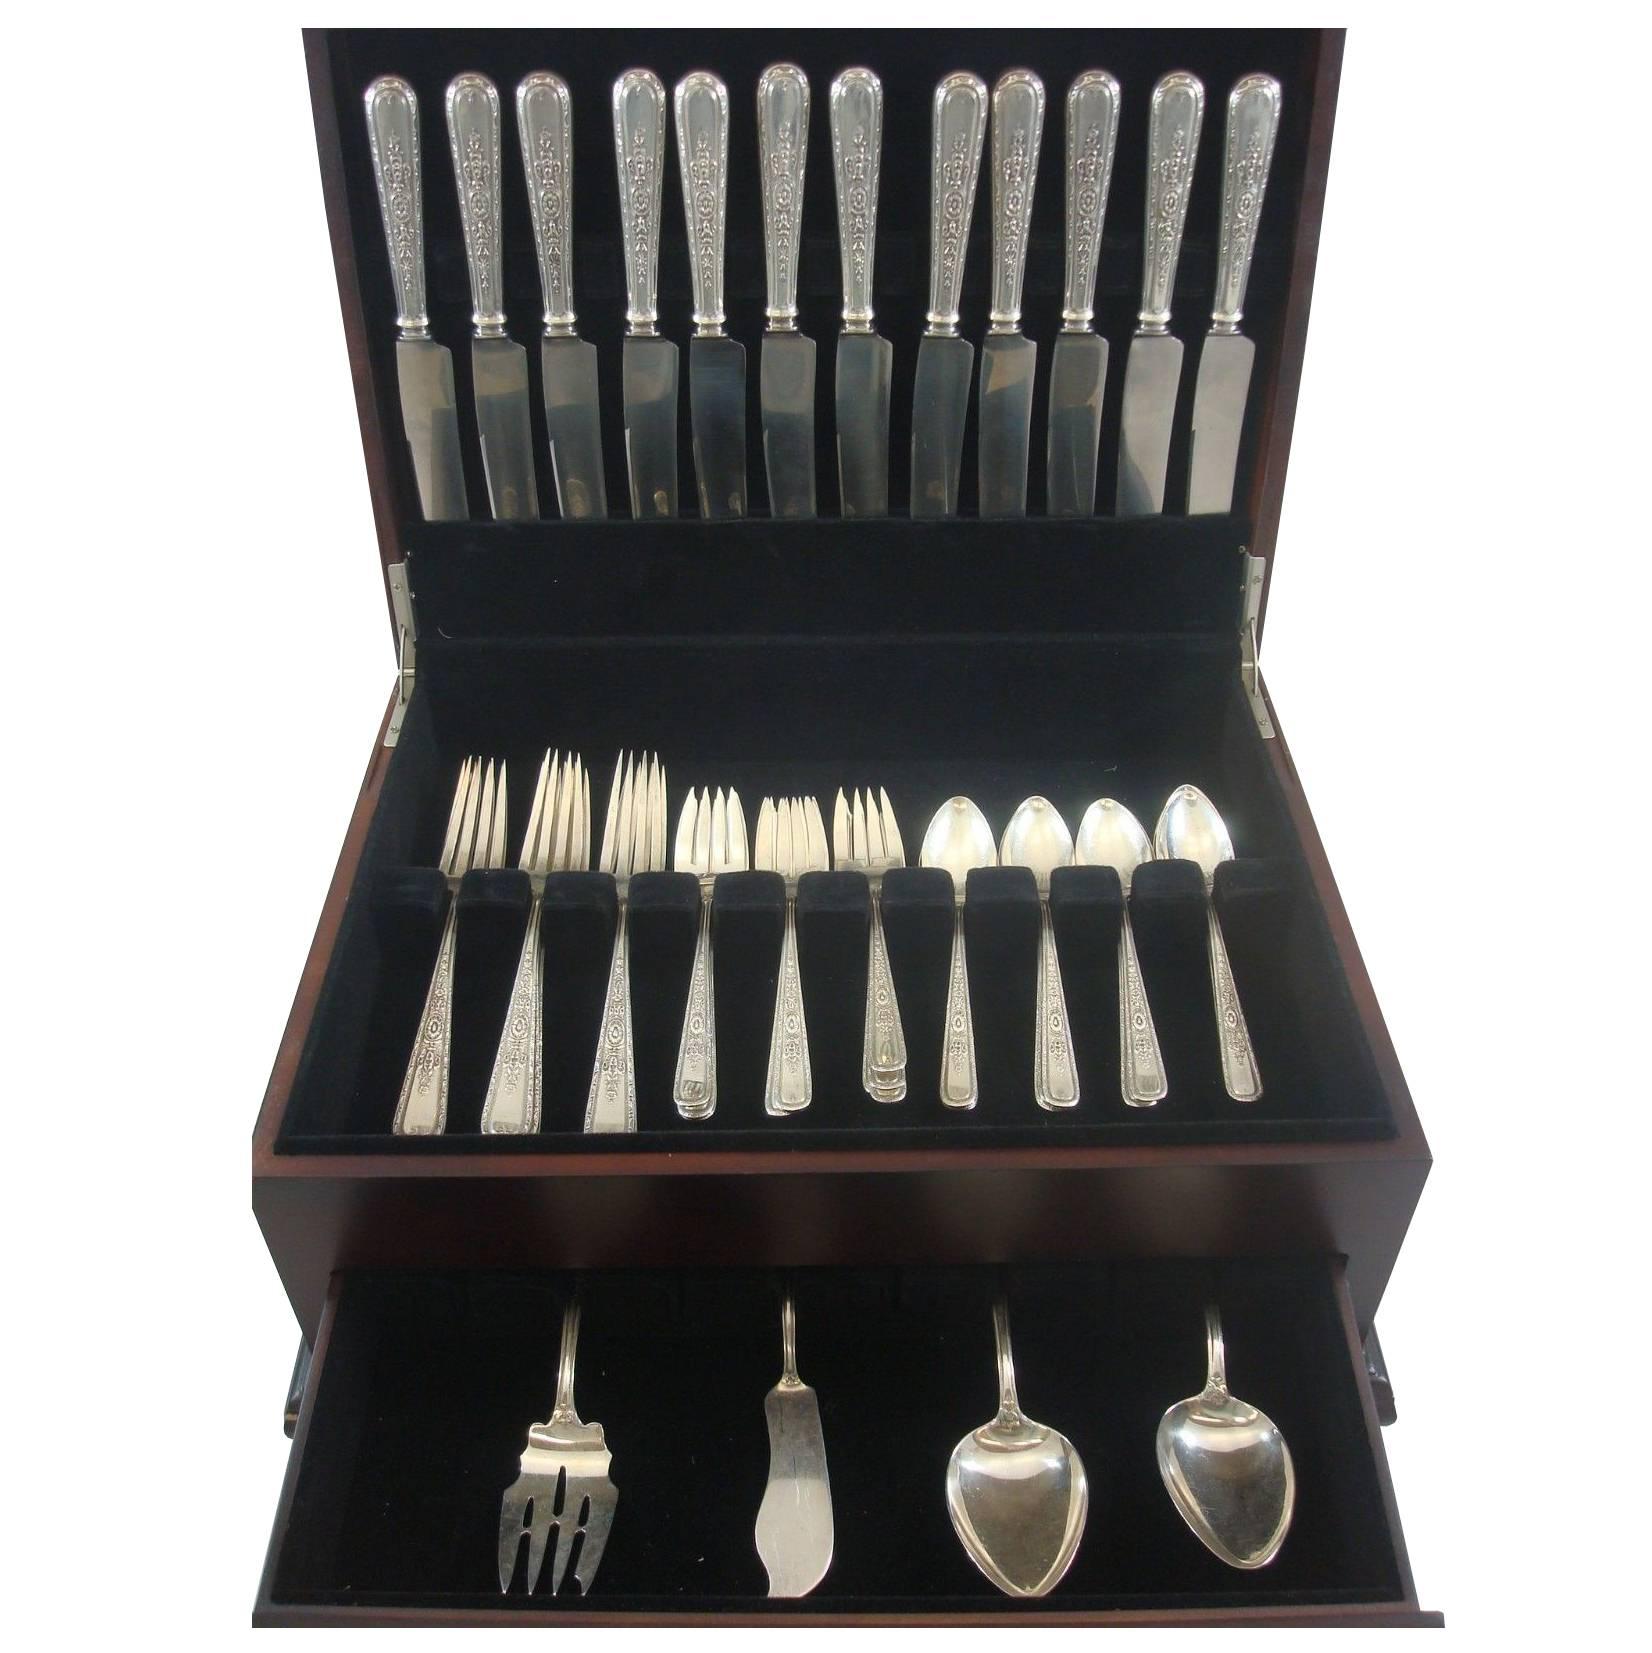 Lady Sterling by Weidlich sterling silver dinner size flatware set of 52-piece set, in excellent condition. This circa 1927 pattern features a design that looks like Fine lace. This set includes:

12 dinner knives, 9 1/2